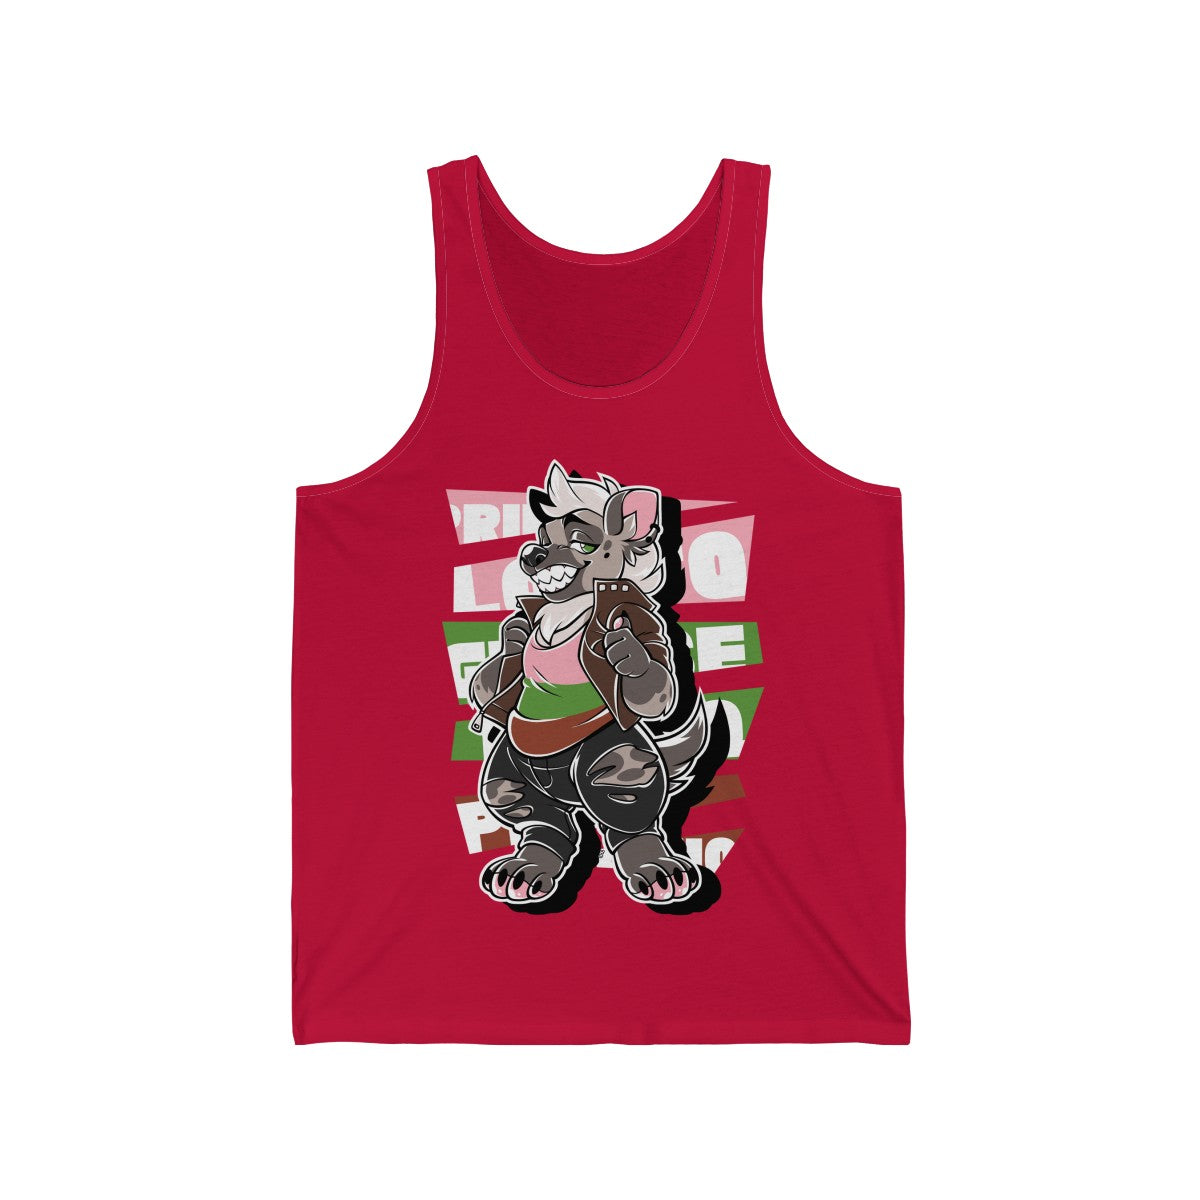 Gynosexual Pride Colt Hyena - Tank Top Tank Top Artworktee Red XS 